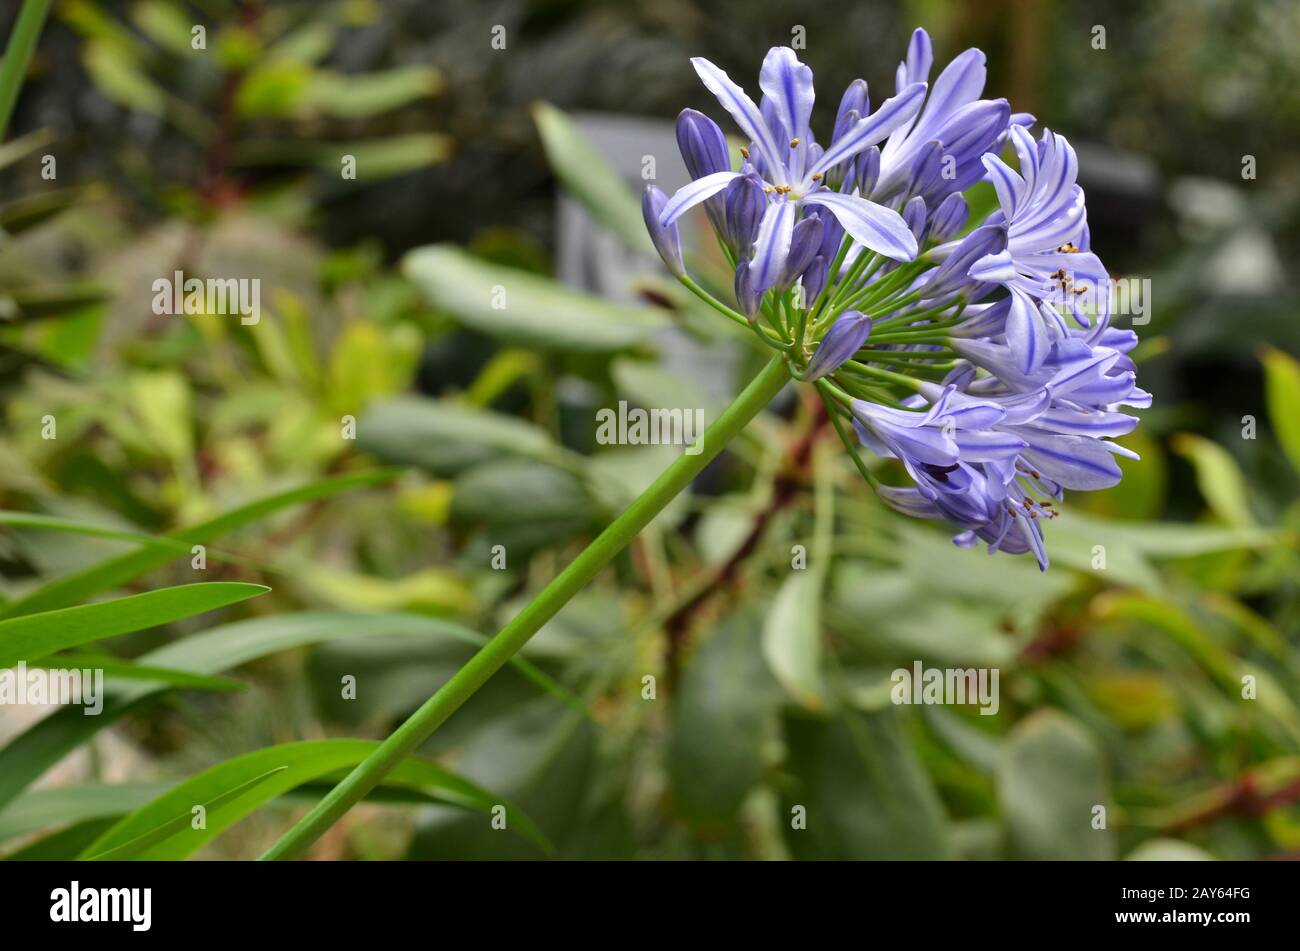 Flowers of the Agapanthus Stock Photo